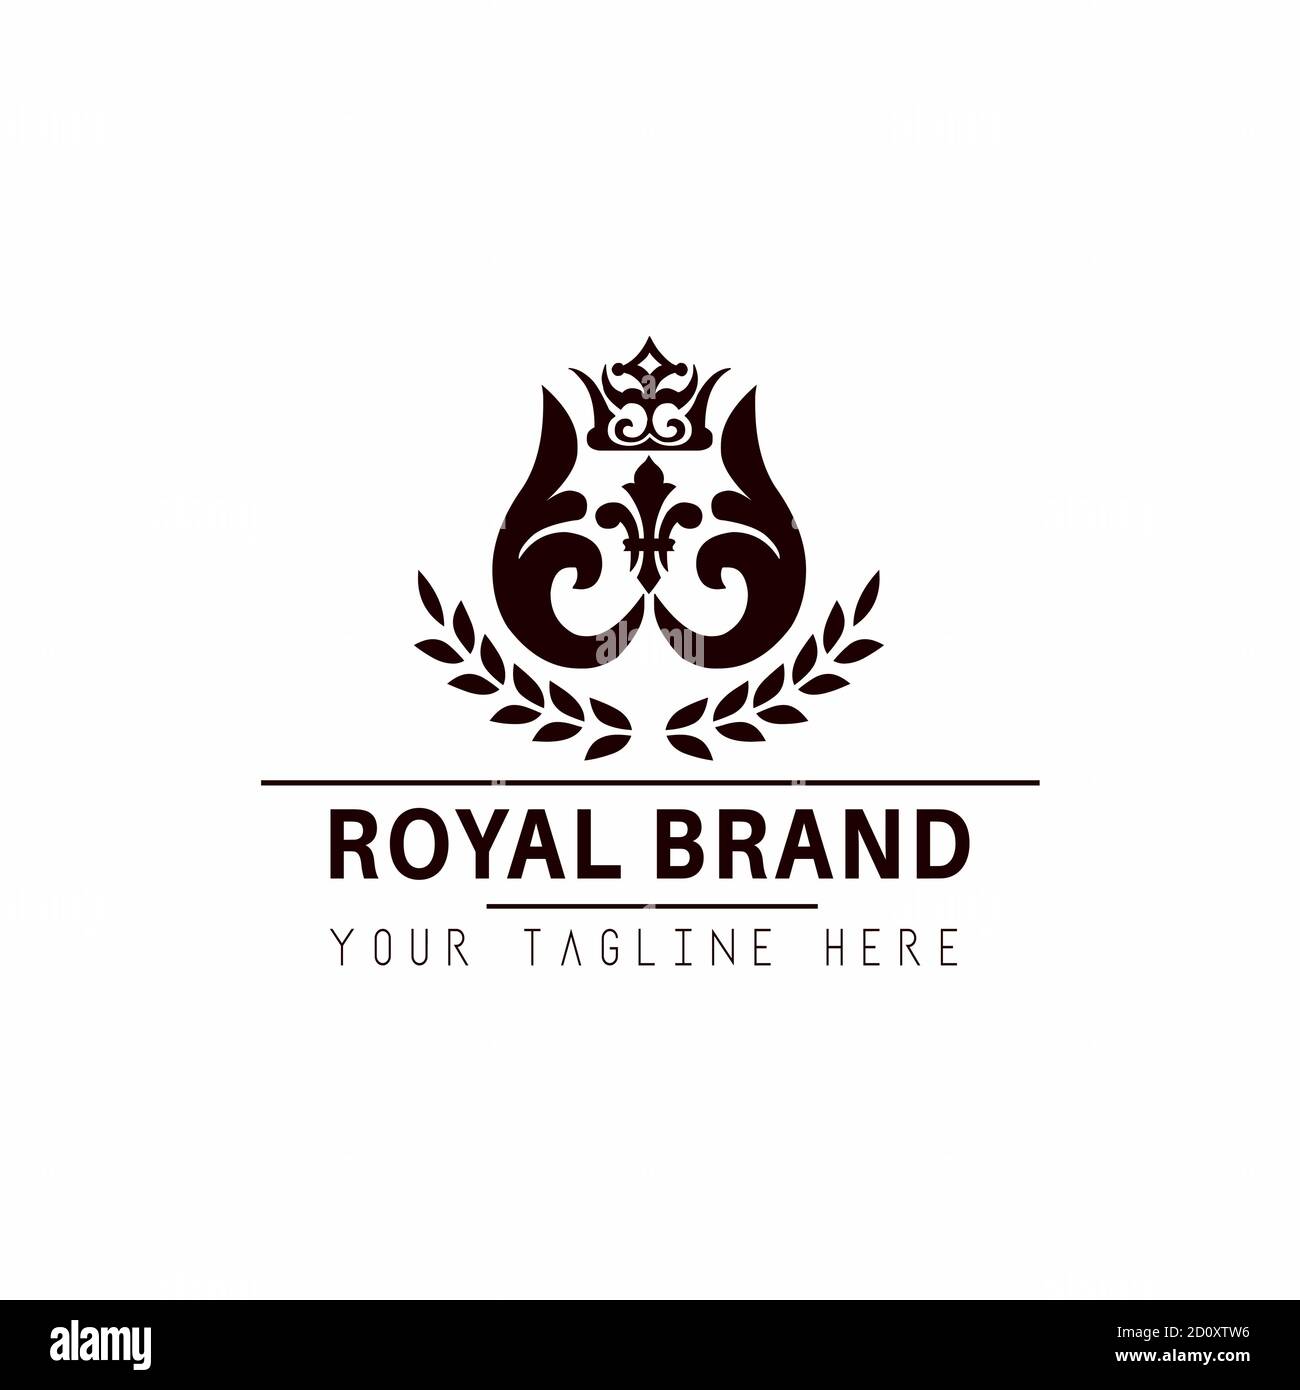 Premium Vector  Initial vl logo design, suitable for logo company, logo  business, and brand identity